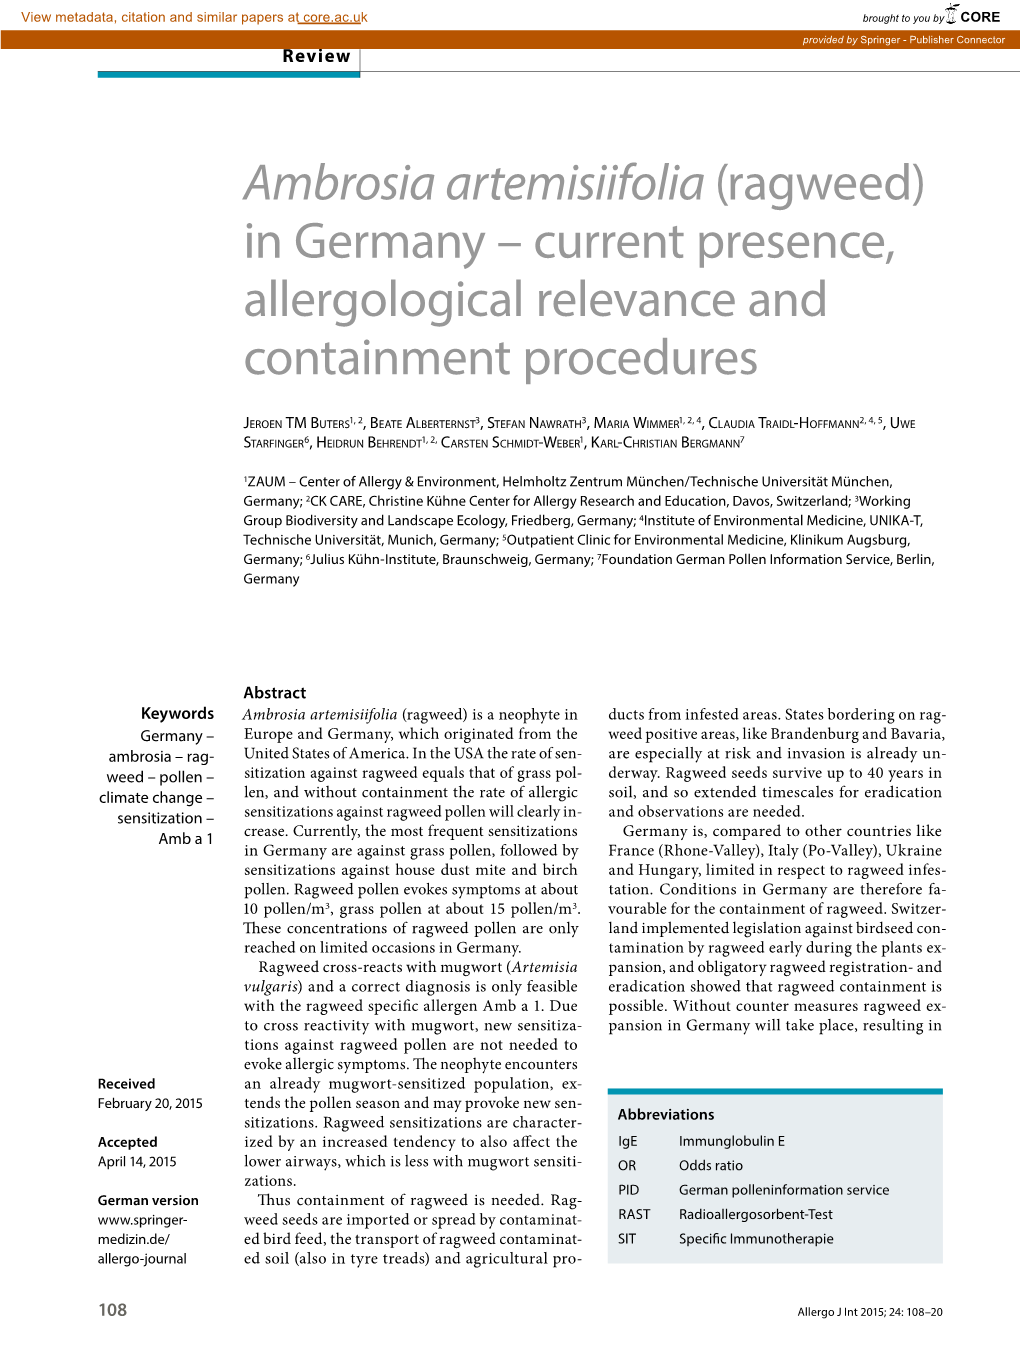 Ambrosia Artemisiifolia (Ragweed) in Germany – Current Presence, Allergological Relevance and Containment Procedures